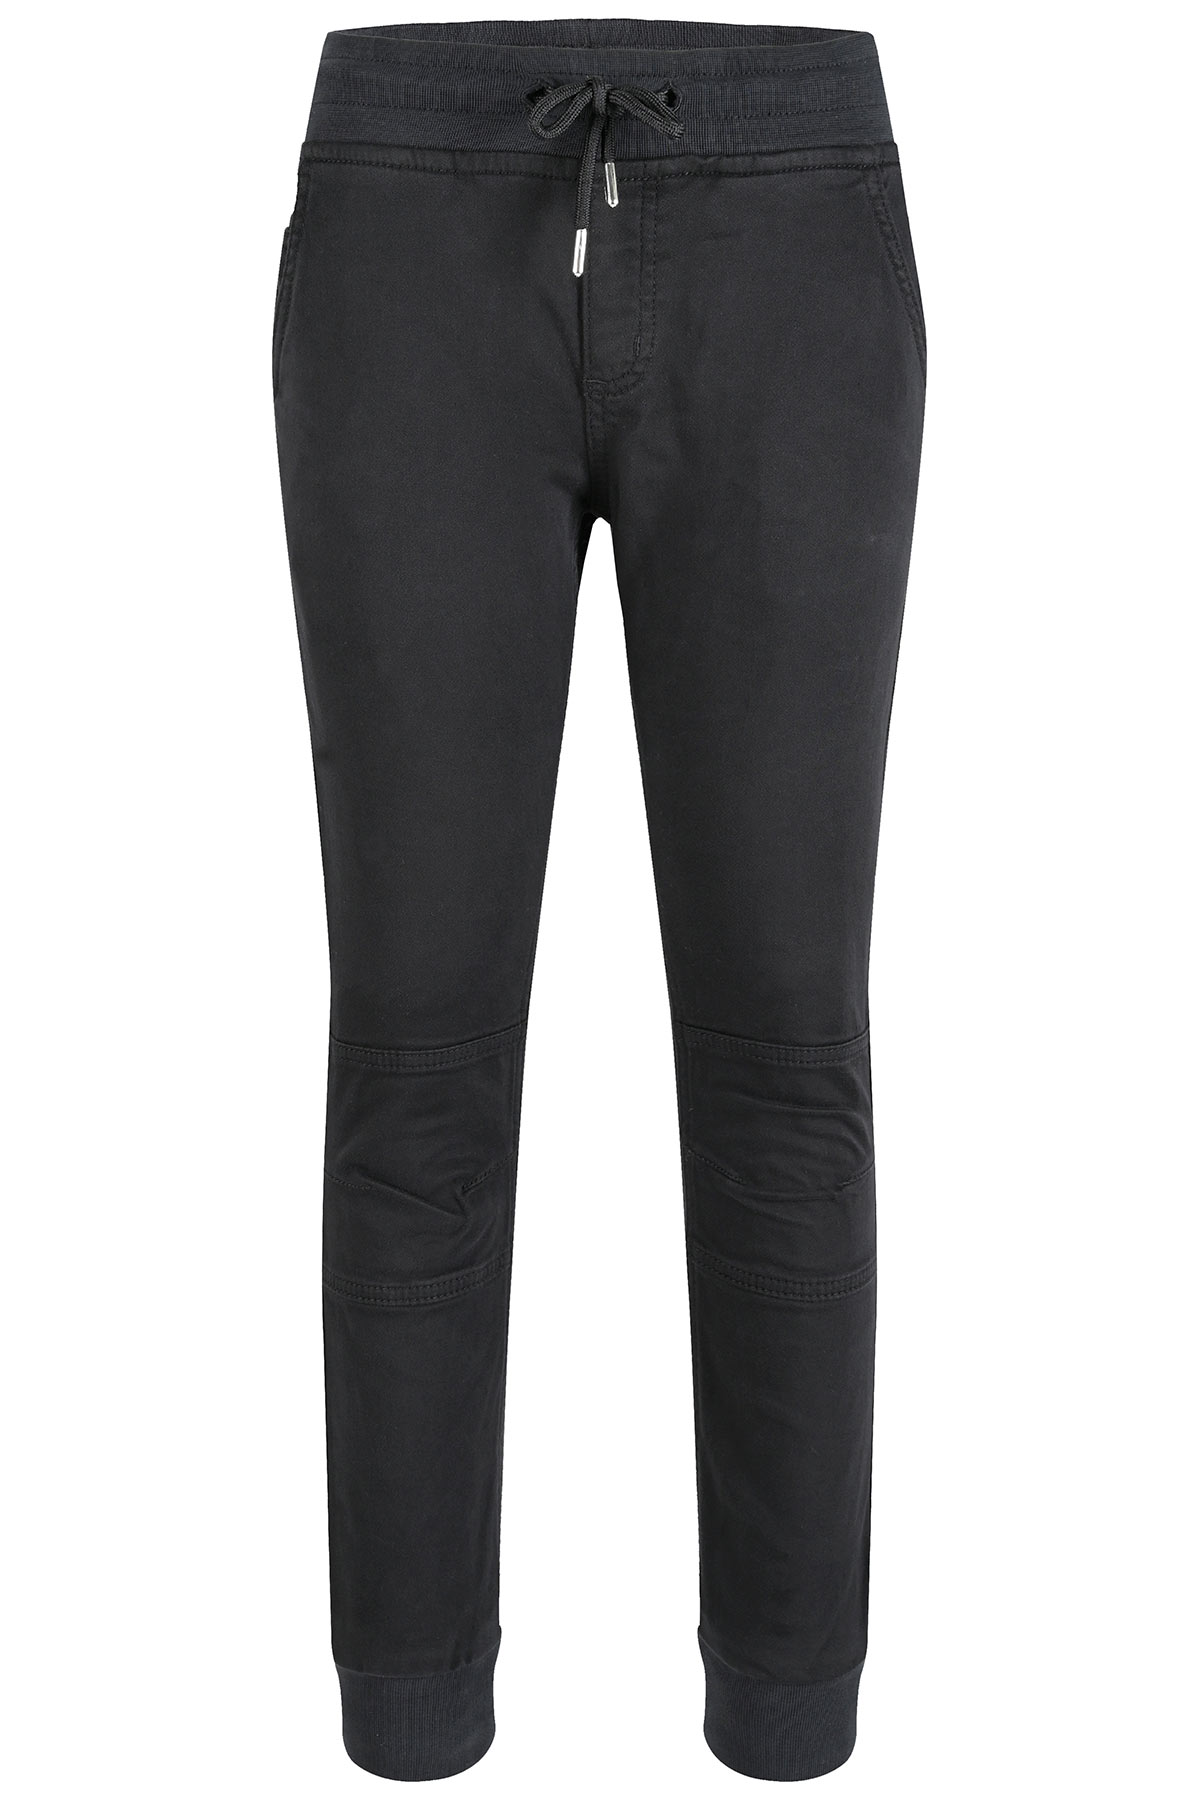 2783-Boys Streetwear Jogger available in Slim,Normal,Wide